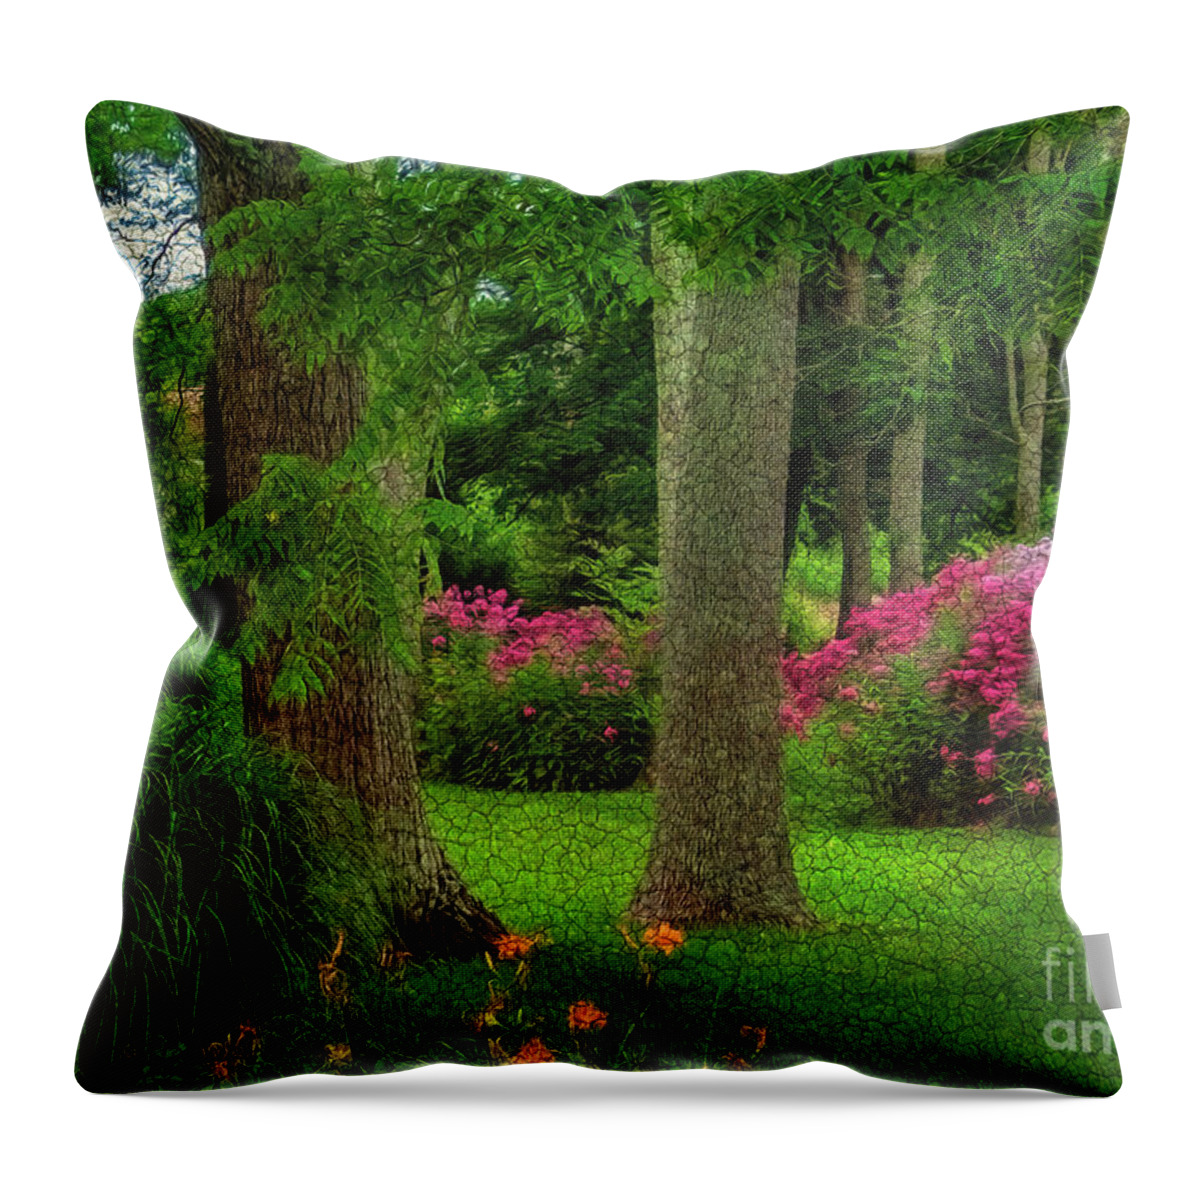 Flower Throw Pillow featuring the photograph Spring Gardens by Shelia Hunt